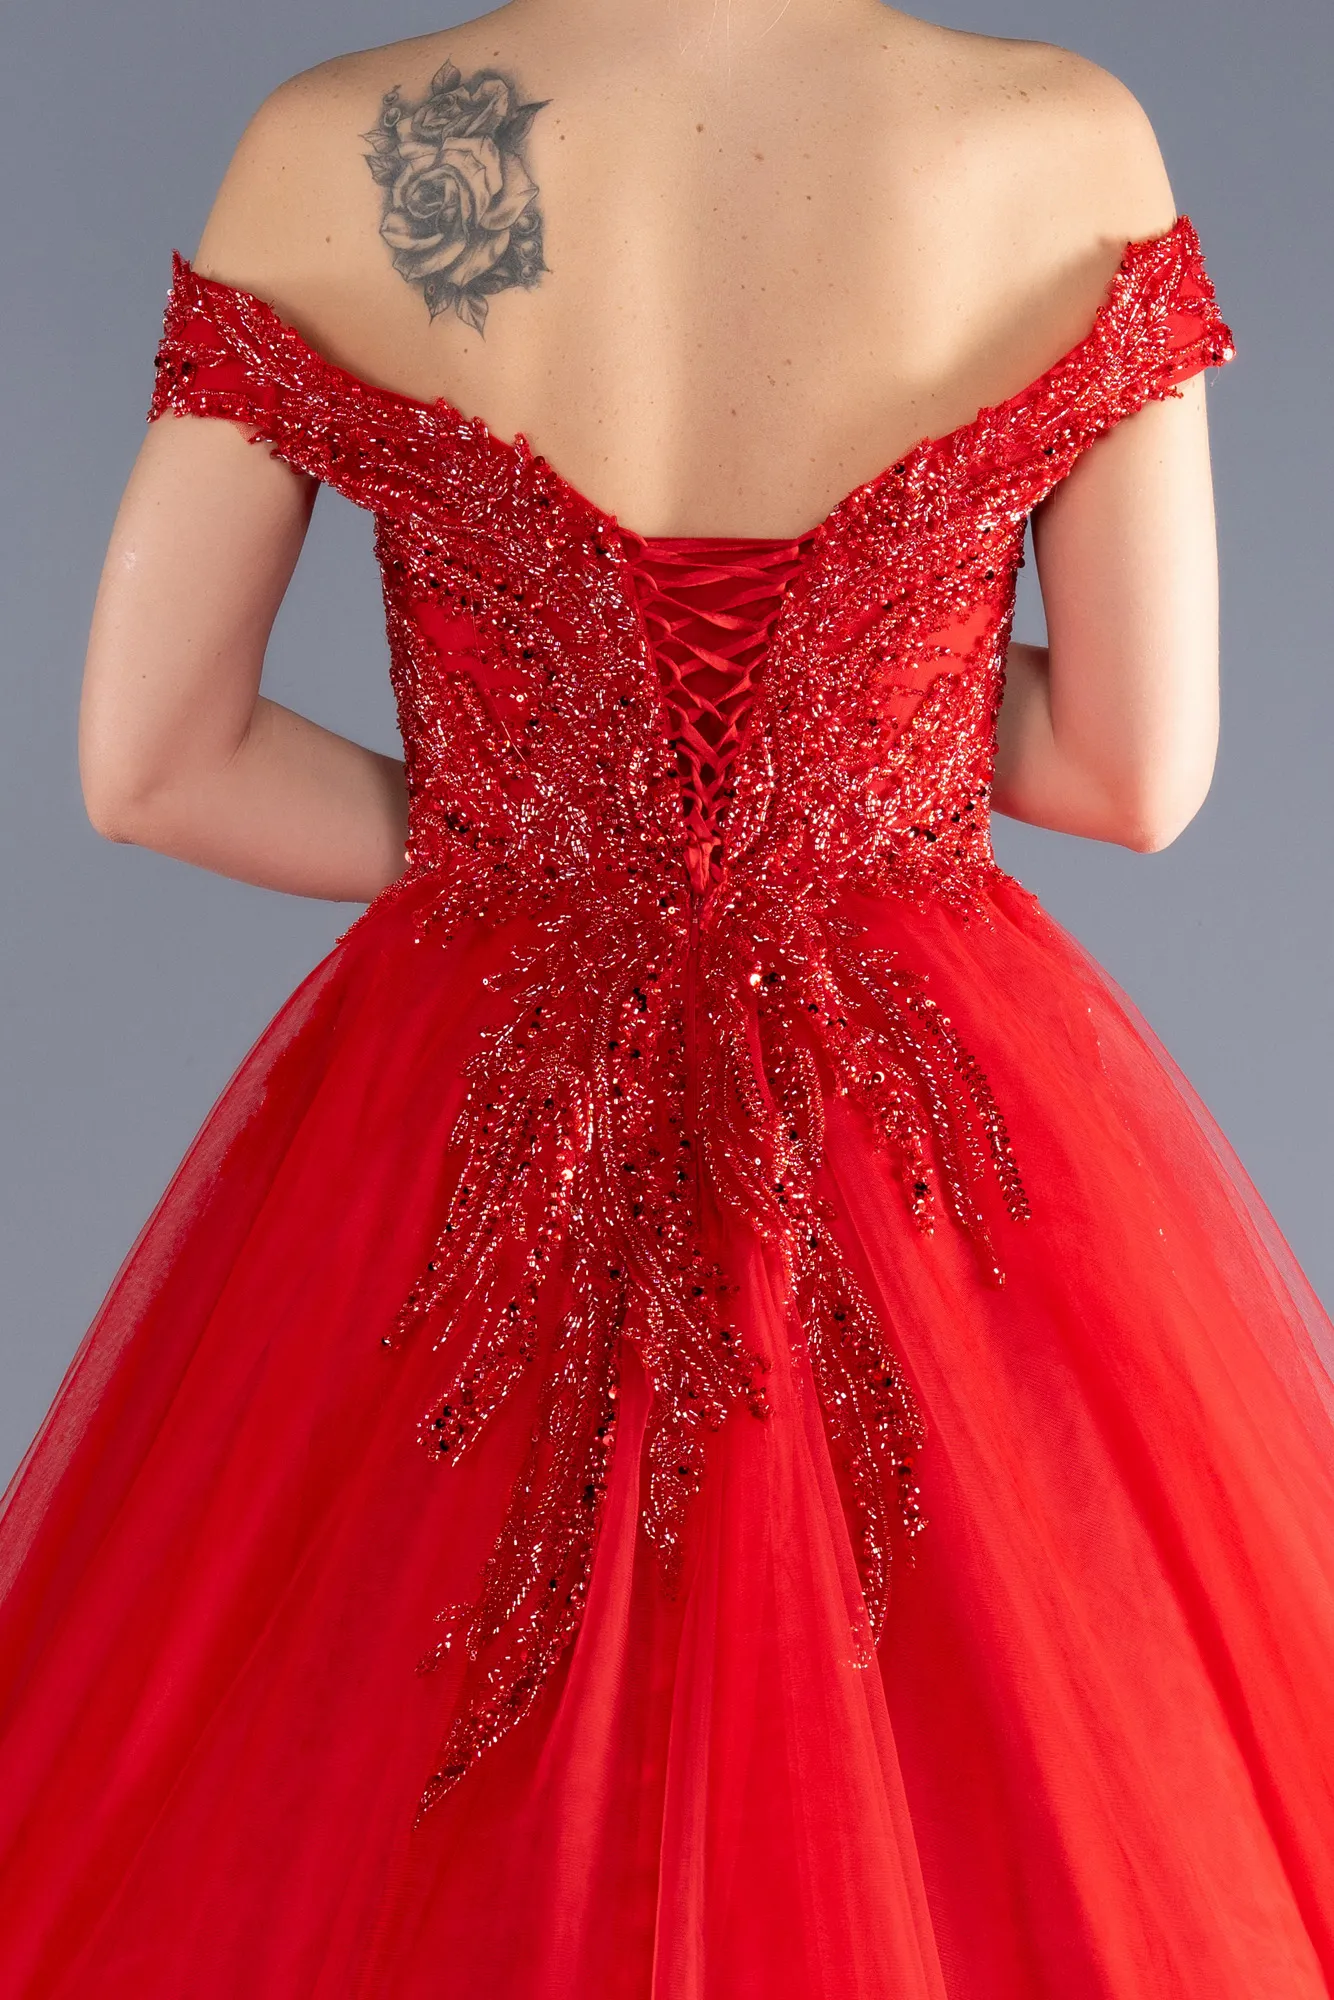 Red-Long Haute Couture Dress ABU3662